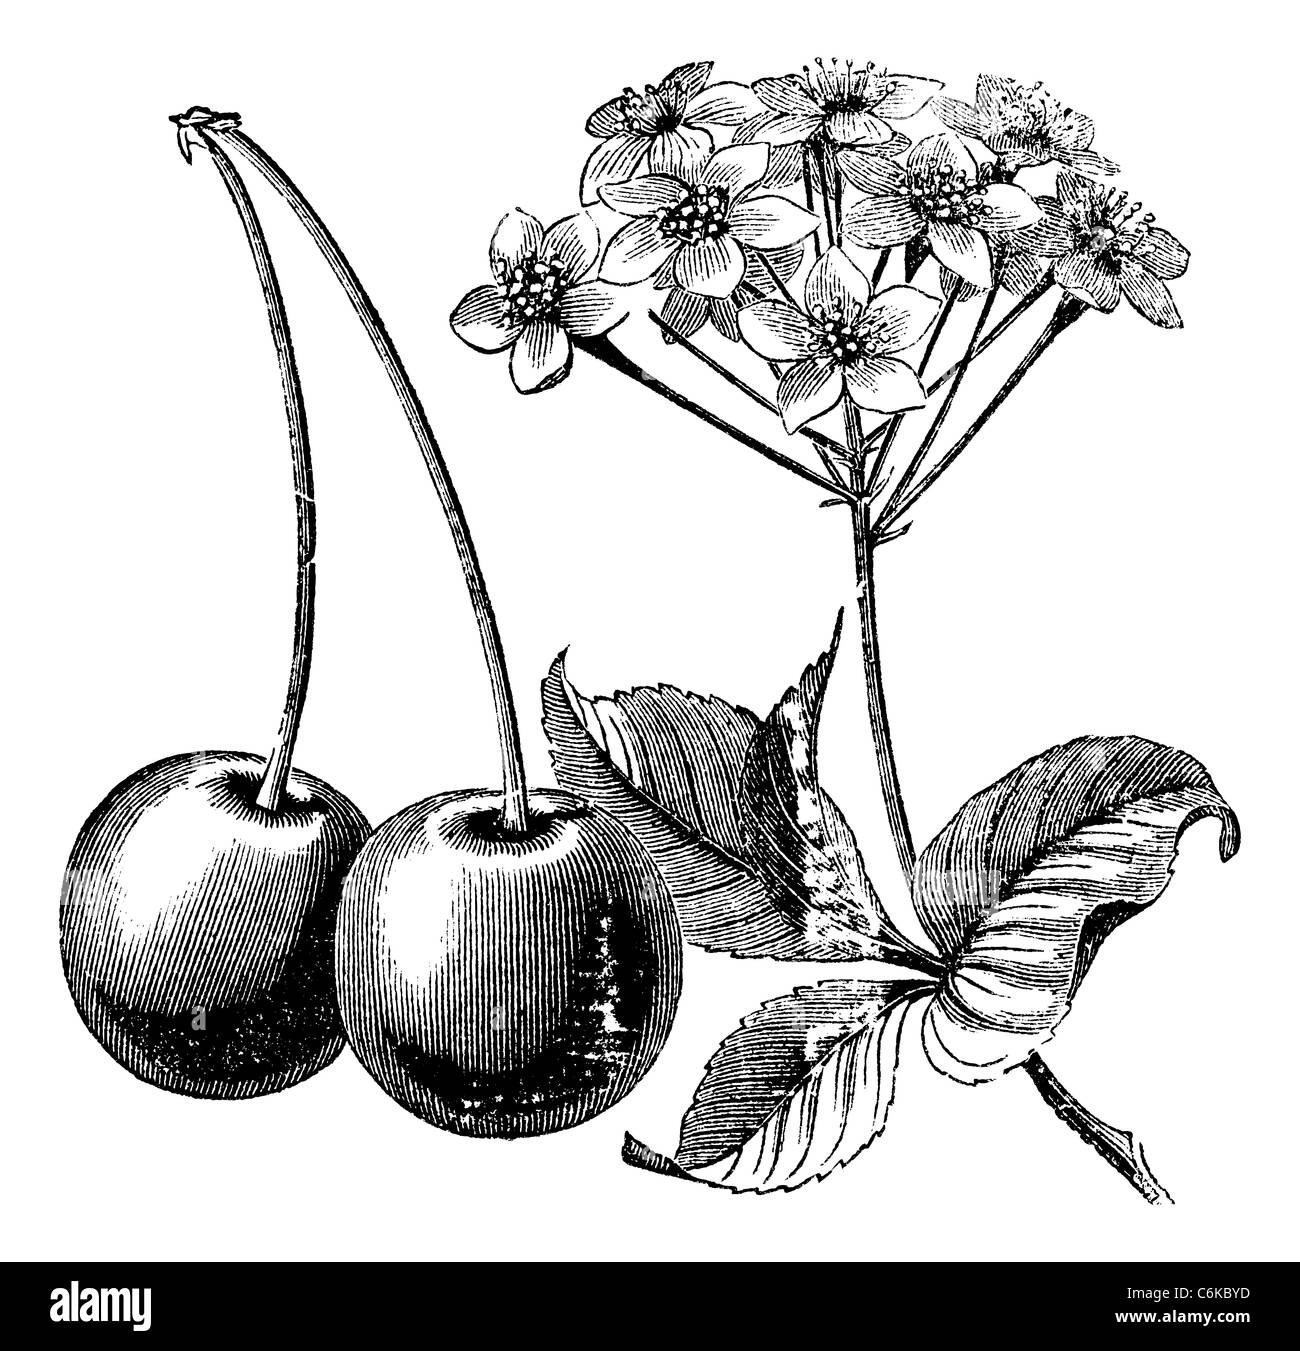 Cherry with leaves and flowers vintage engraving. Old engraved illustration of two cherries with leaves and flowers. Stock Photo